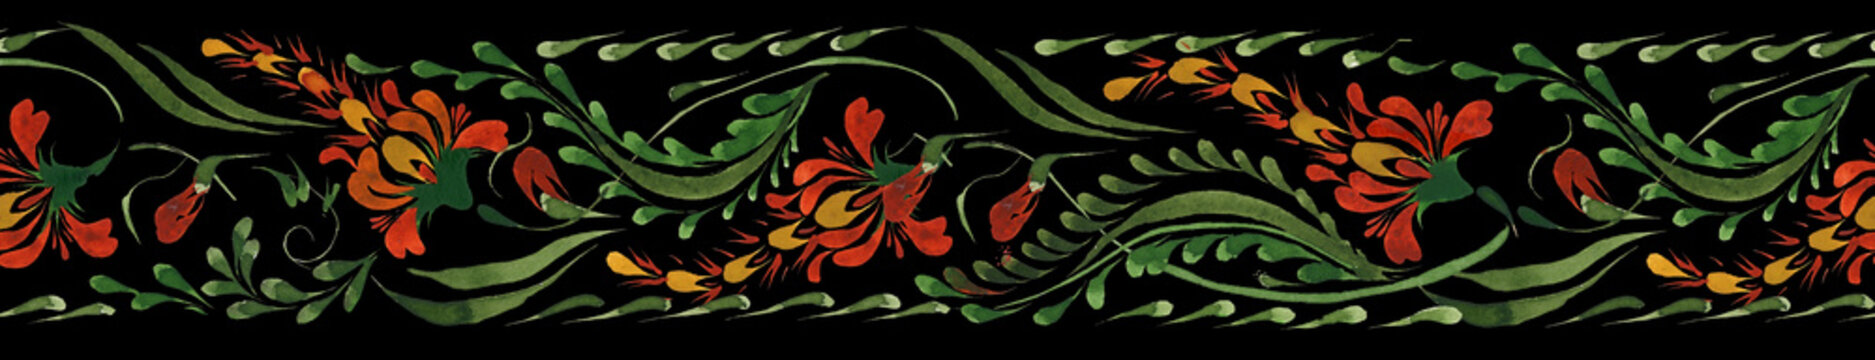 Ukrainian folk painting style Petrykivka. Floral watercolor seamless border pattern from red lupine flowers and green leaves on a black background. Ethnic design